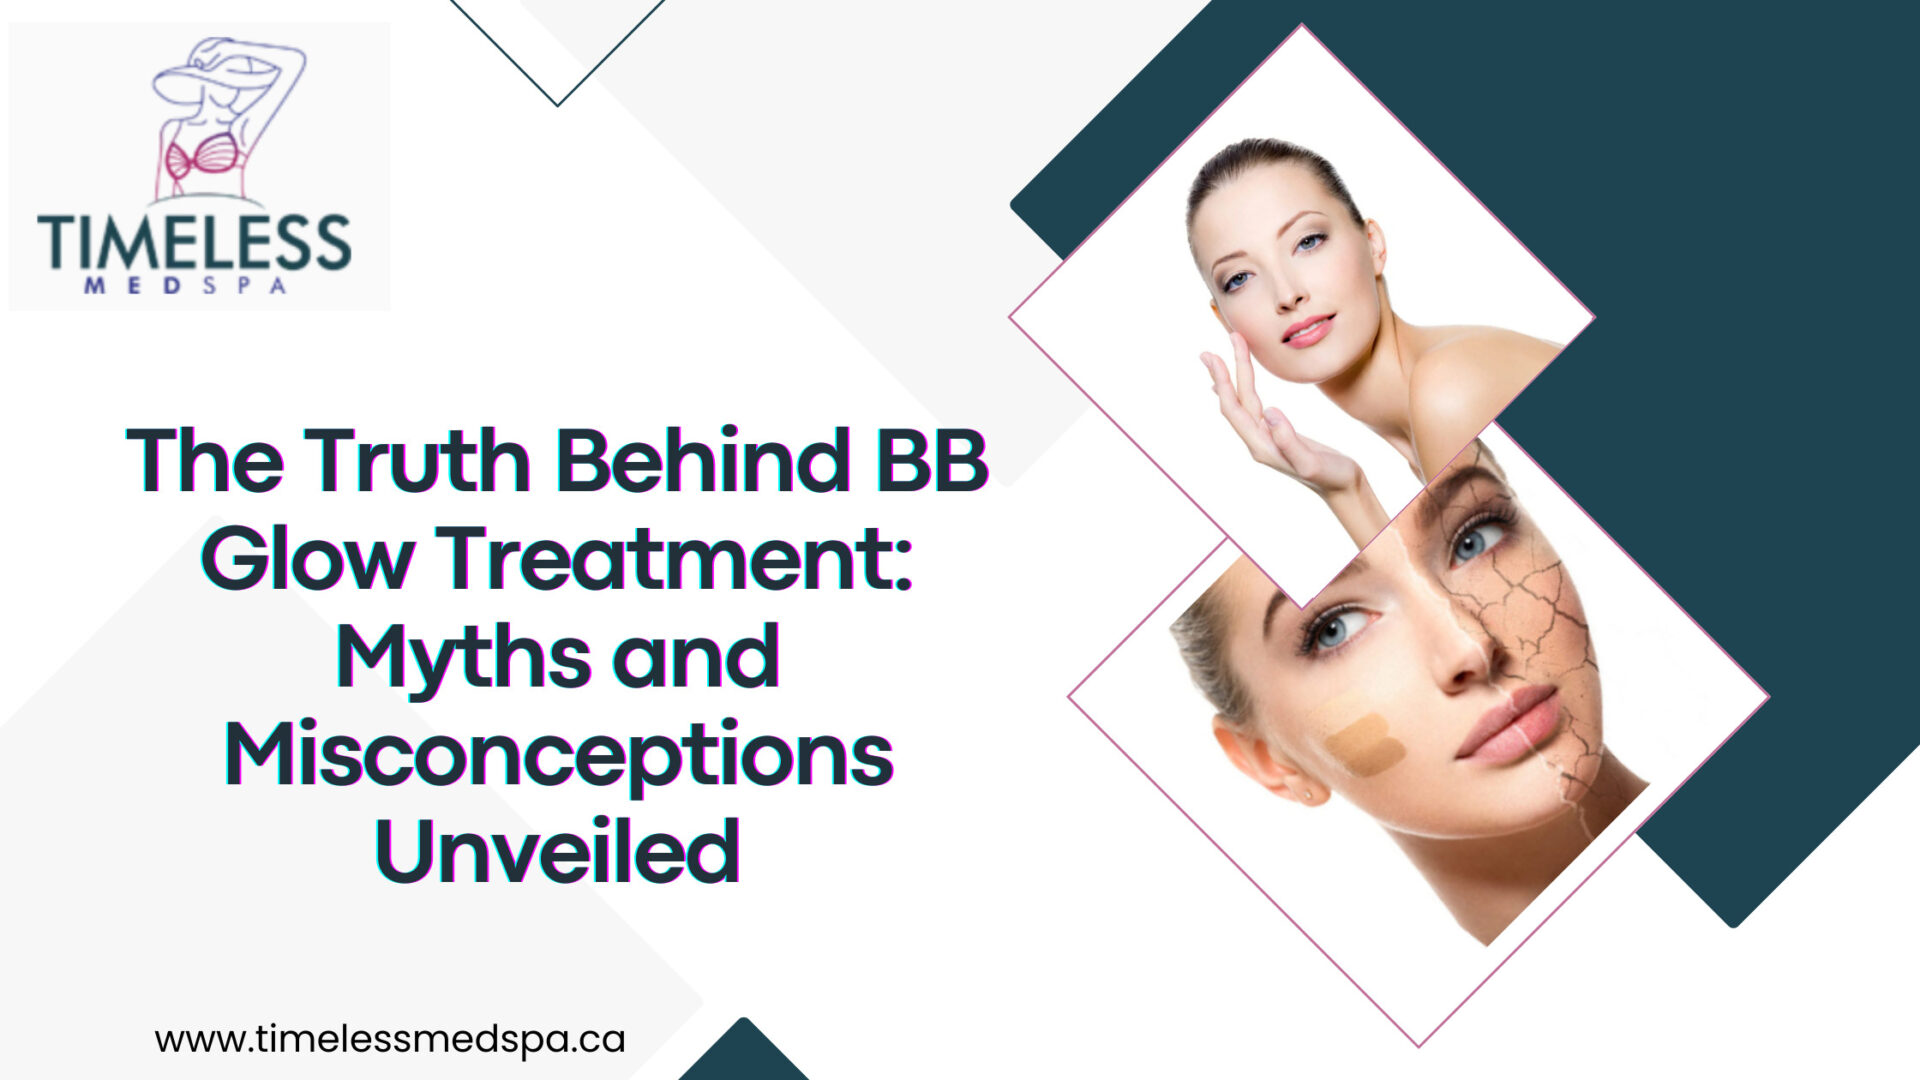 The Truth Behind BB Glow Treatment: Myths and Misconceptions Unveiled